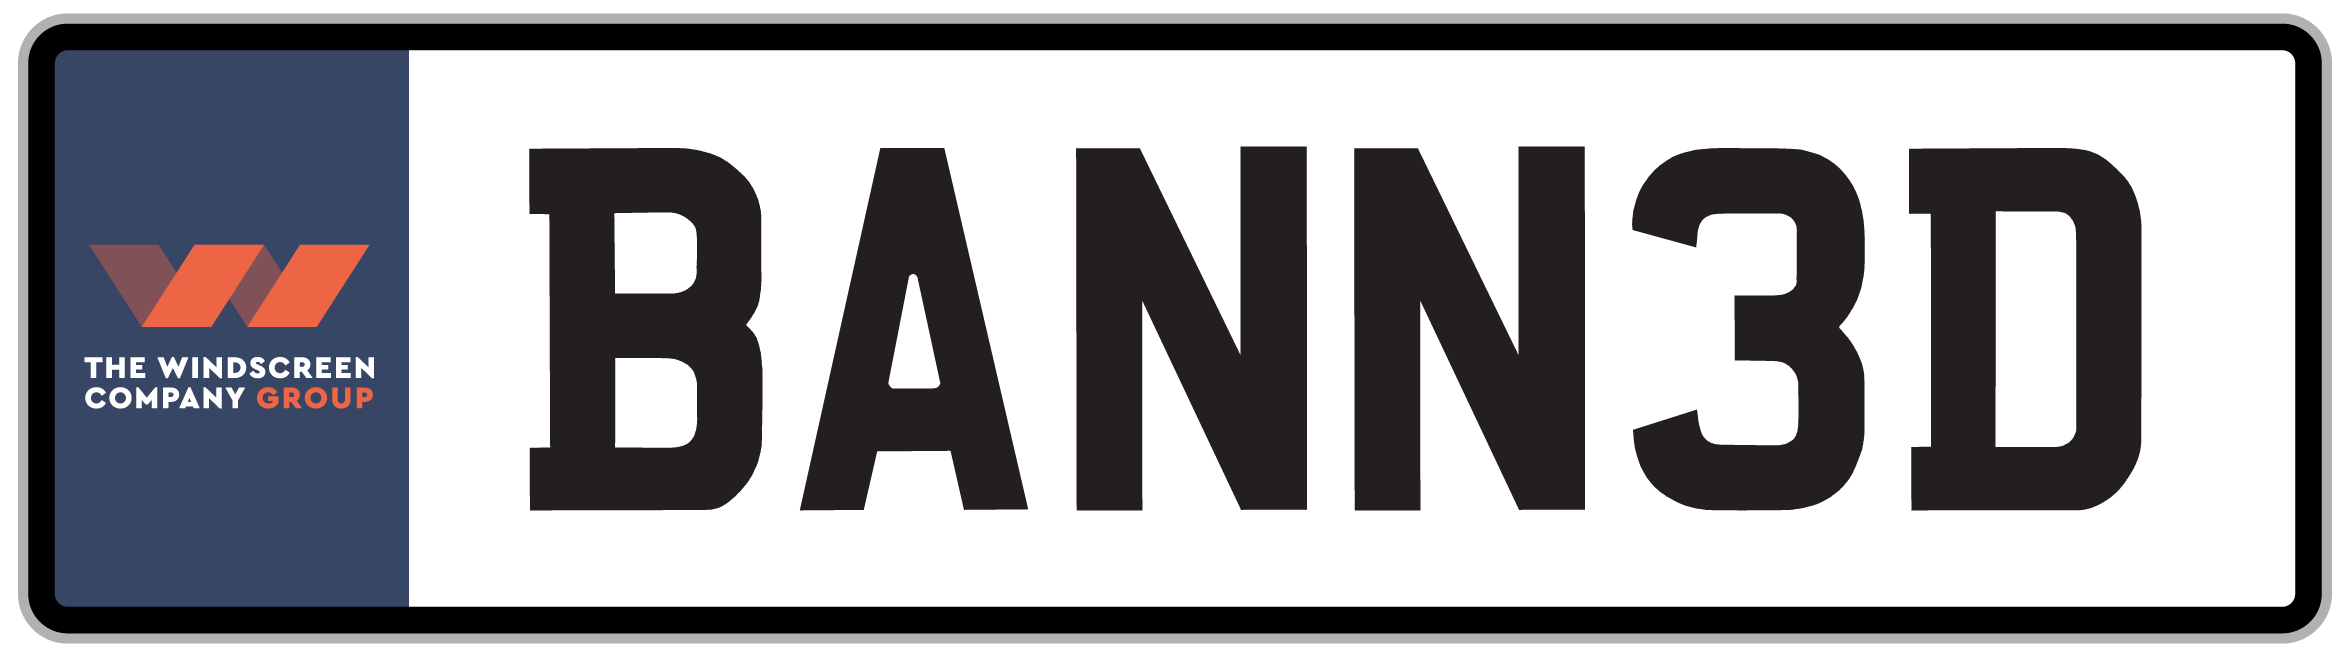 Banned UK Number Plates-01